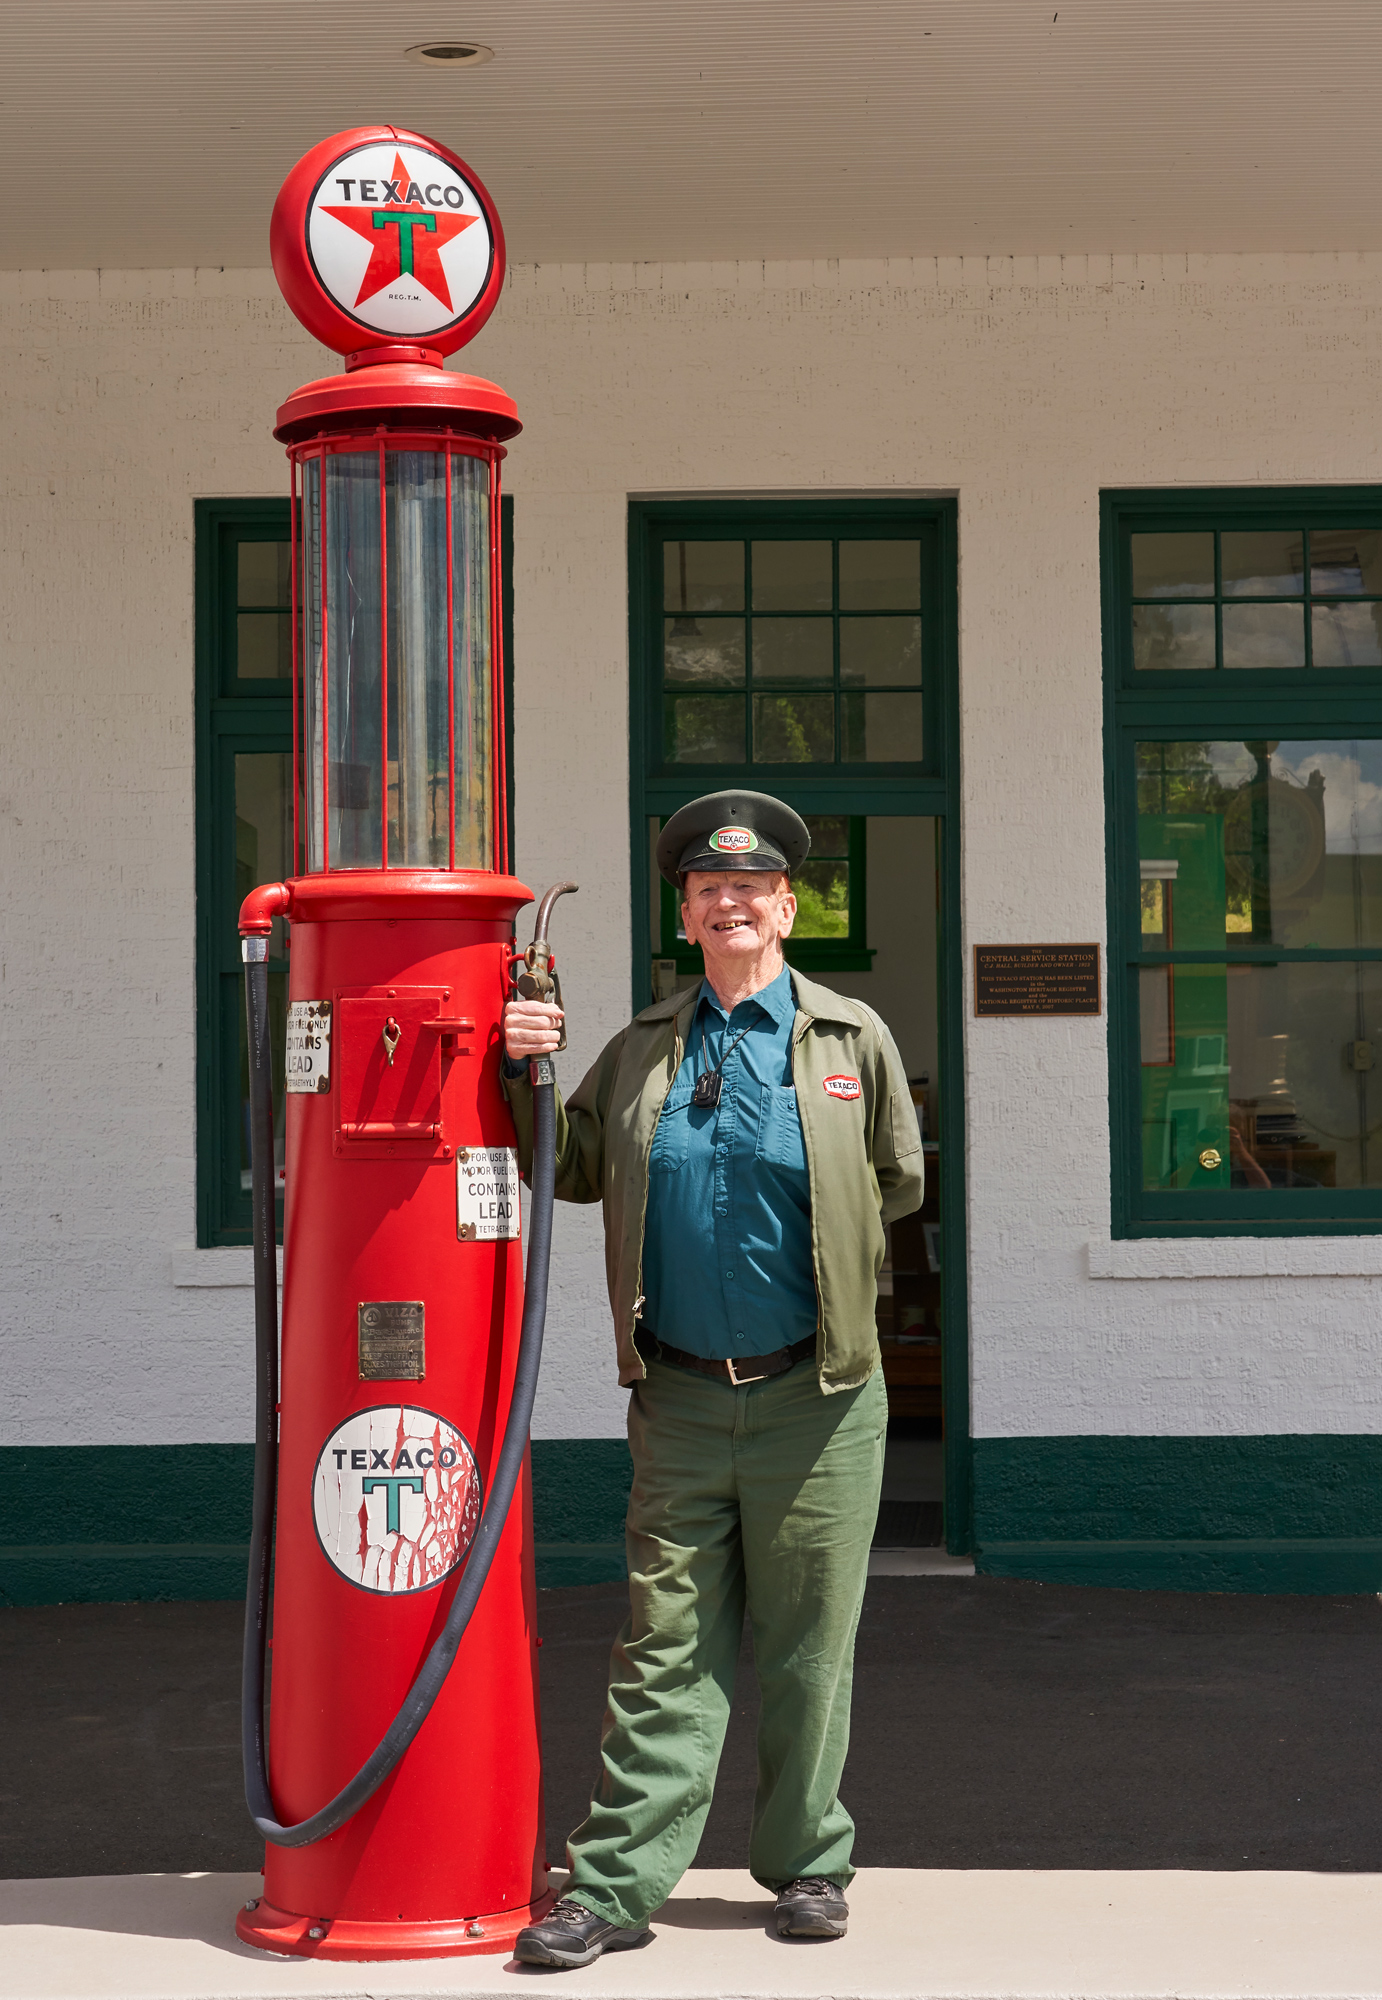 This guy is a hoot and a Palouse Classic. He hangs out at the visitor bureau which is also an old Texaco station and poses proudly. I hope he is still there when we visit this year.